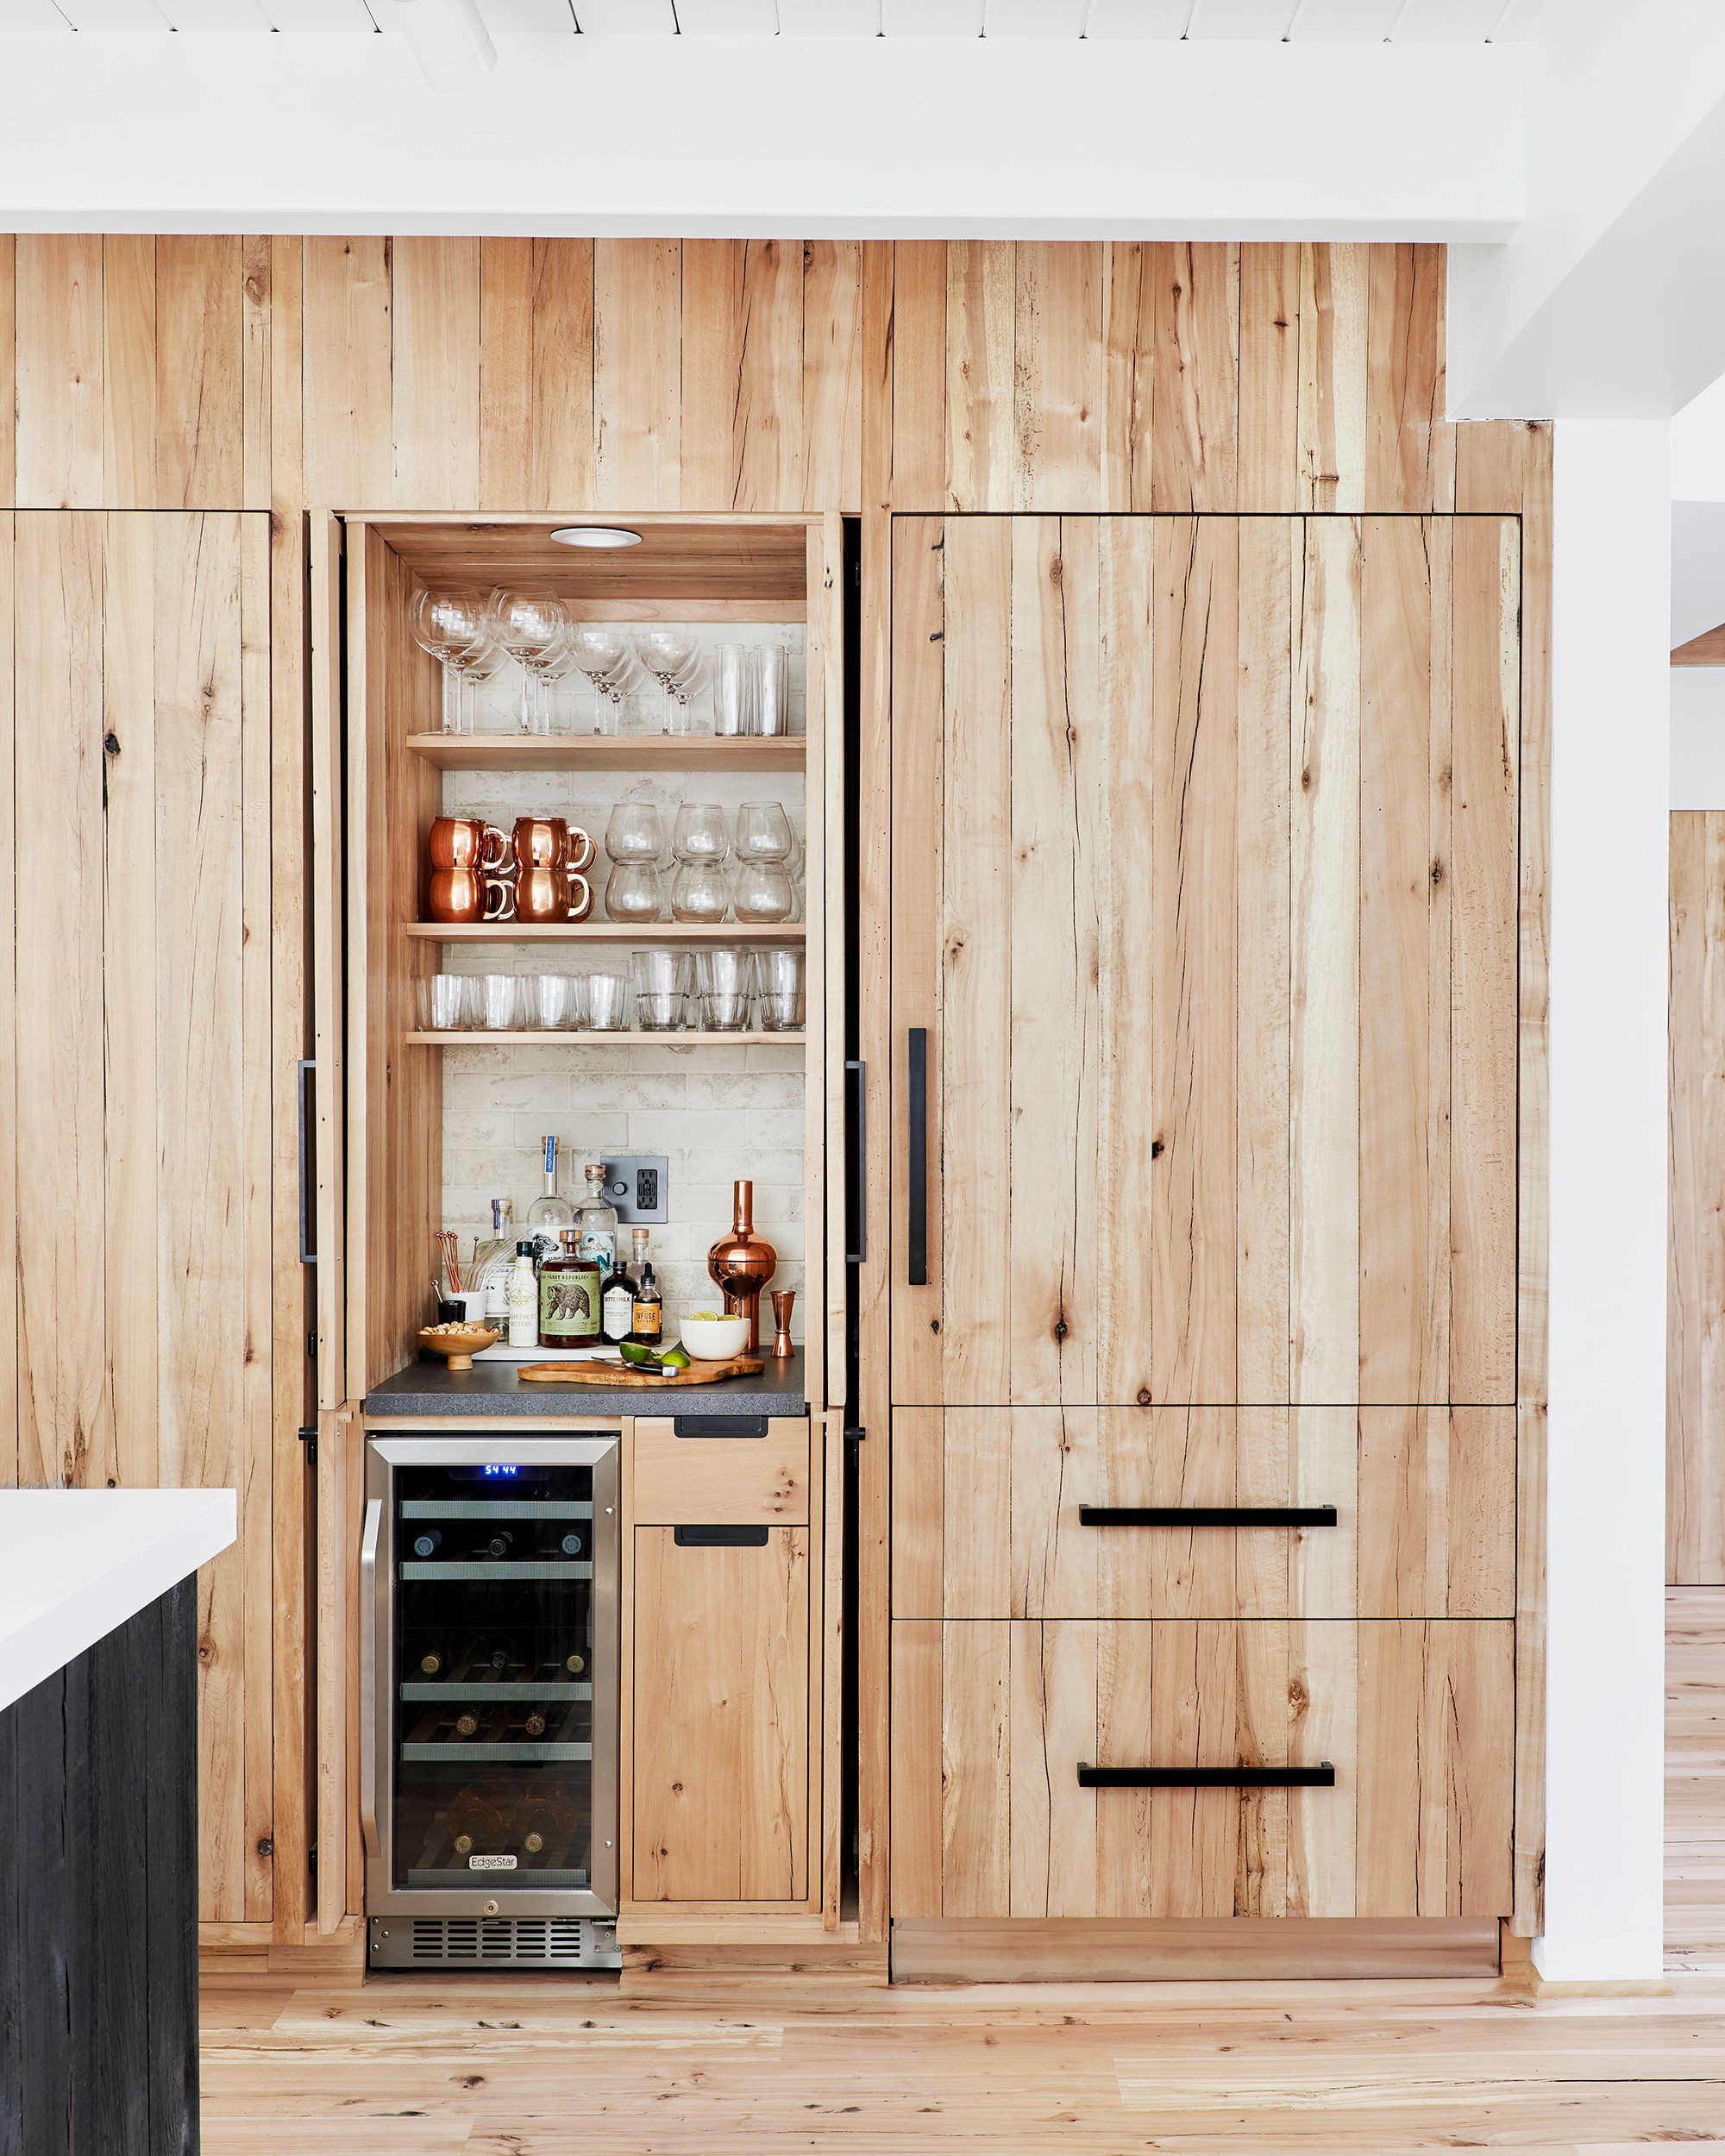 Bar Decor For Home / 75 Beautiful Large Home Bar Pictures Ideas December 2020 Houzz / One of the main misconceptions is that only large houses and big apartments have home bars since they take up a lot of space.